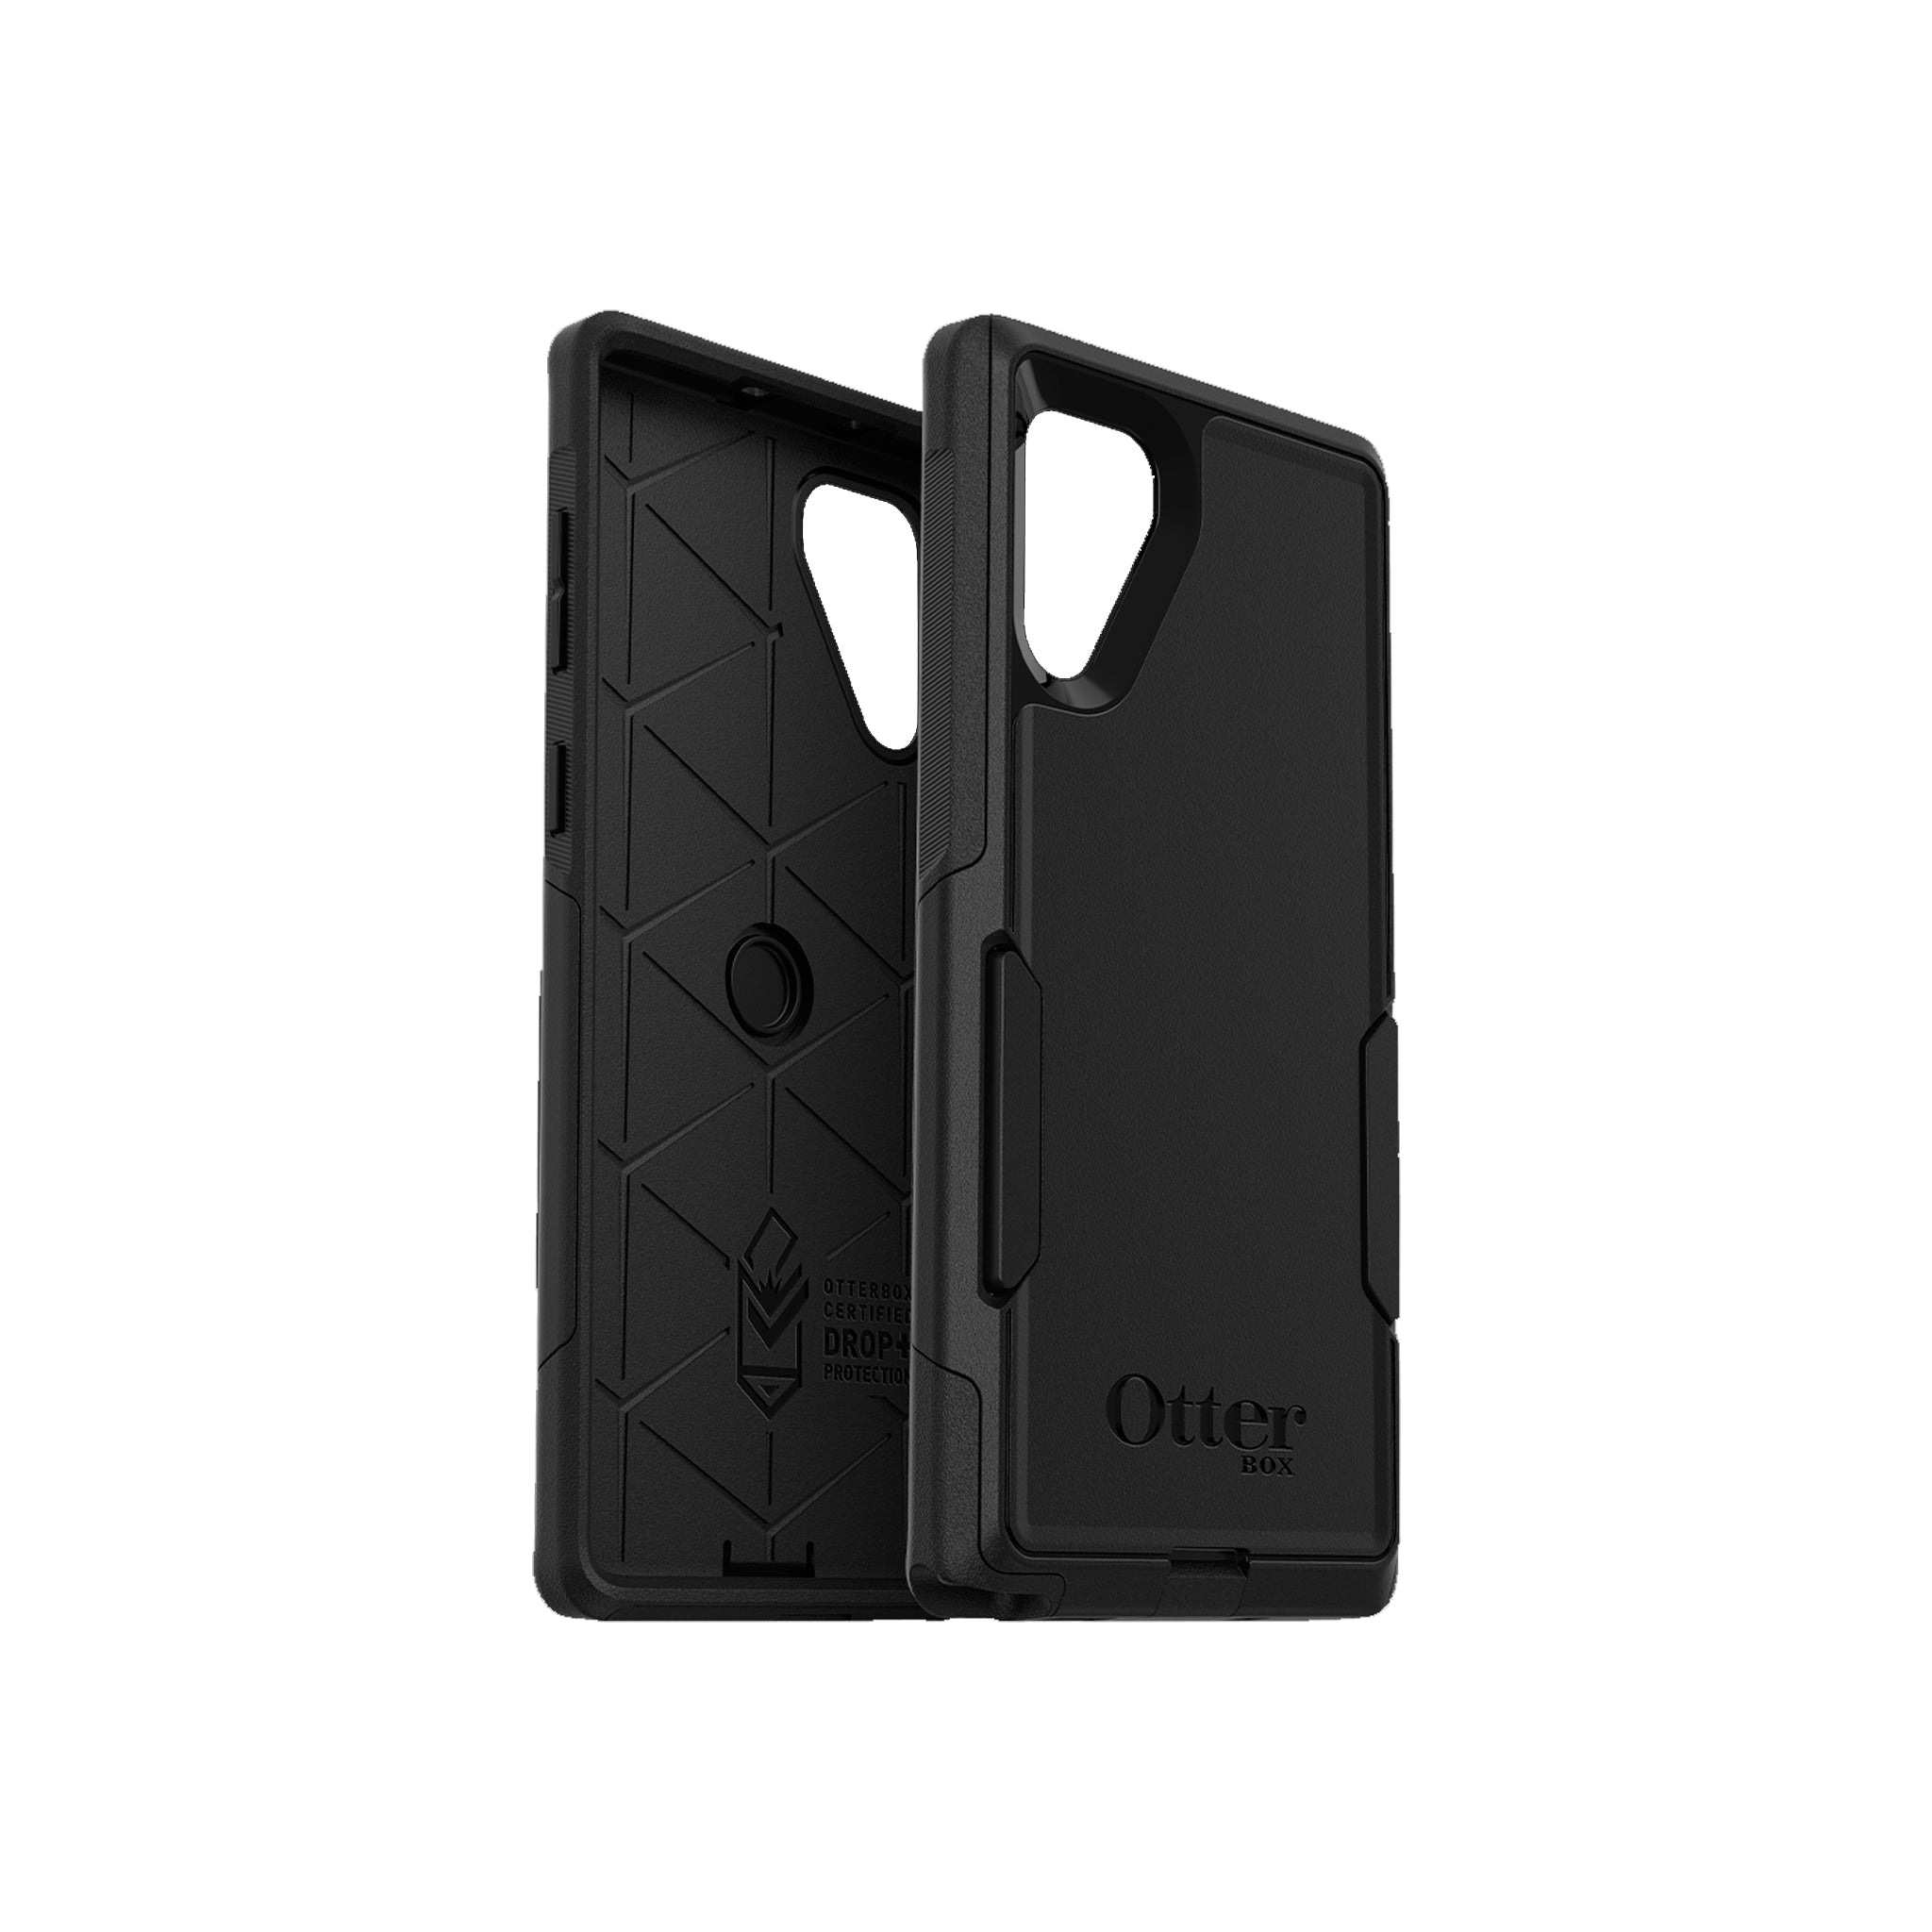 OtterBox - Commuter Series Case for Galaxy Note 10 - Black